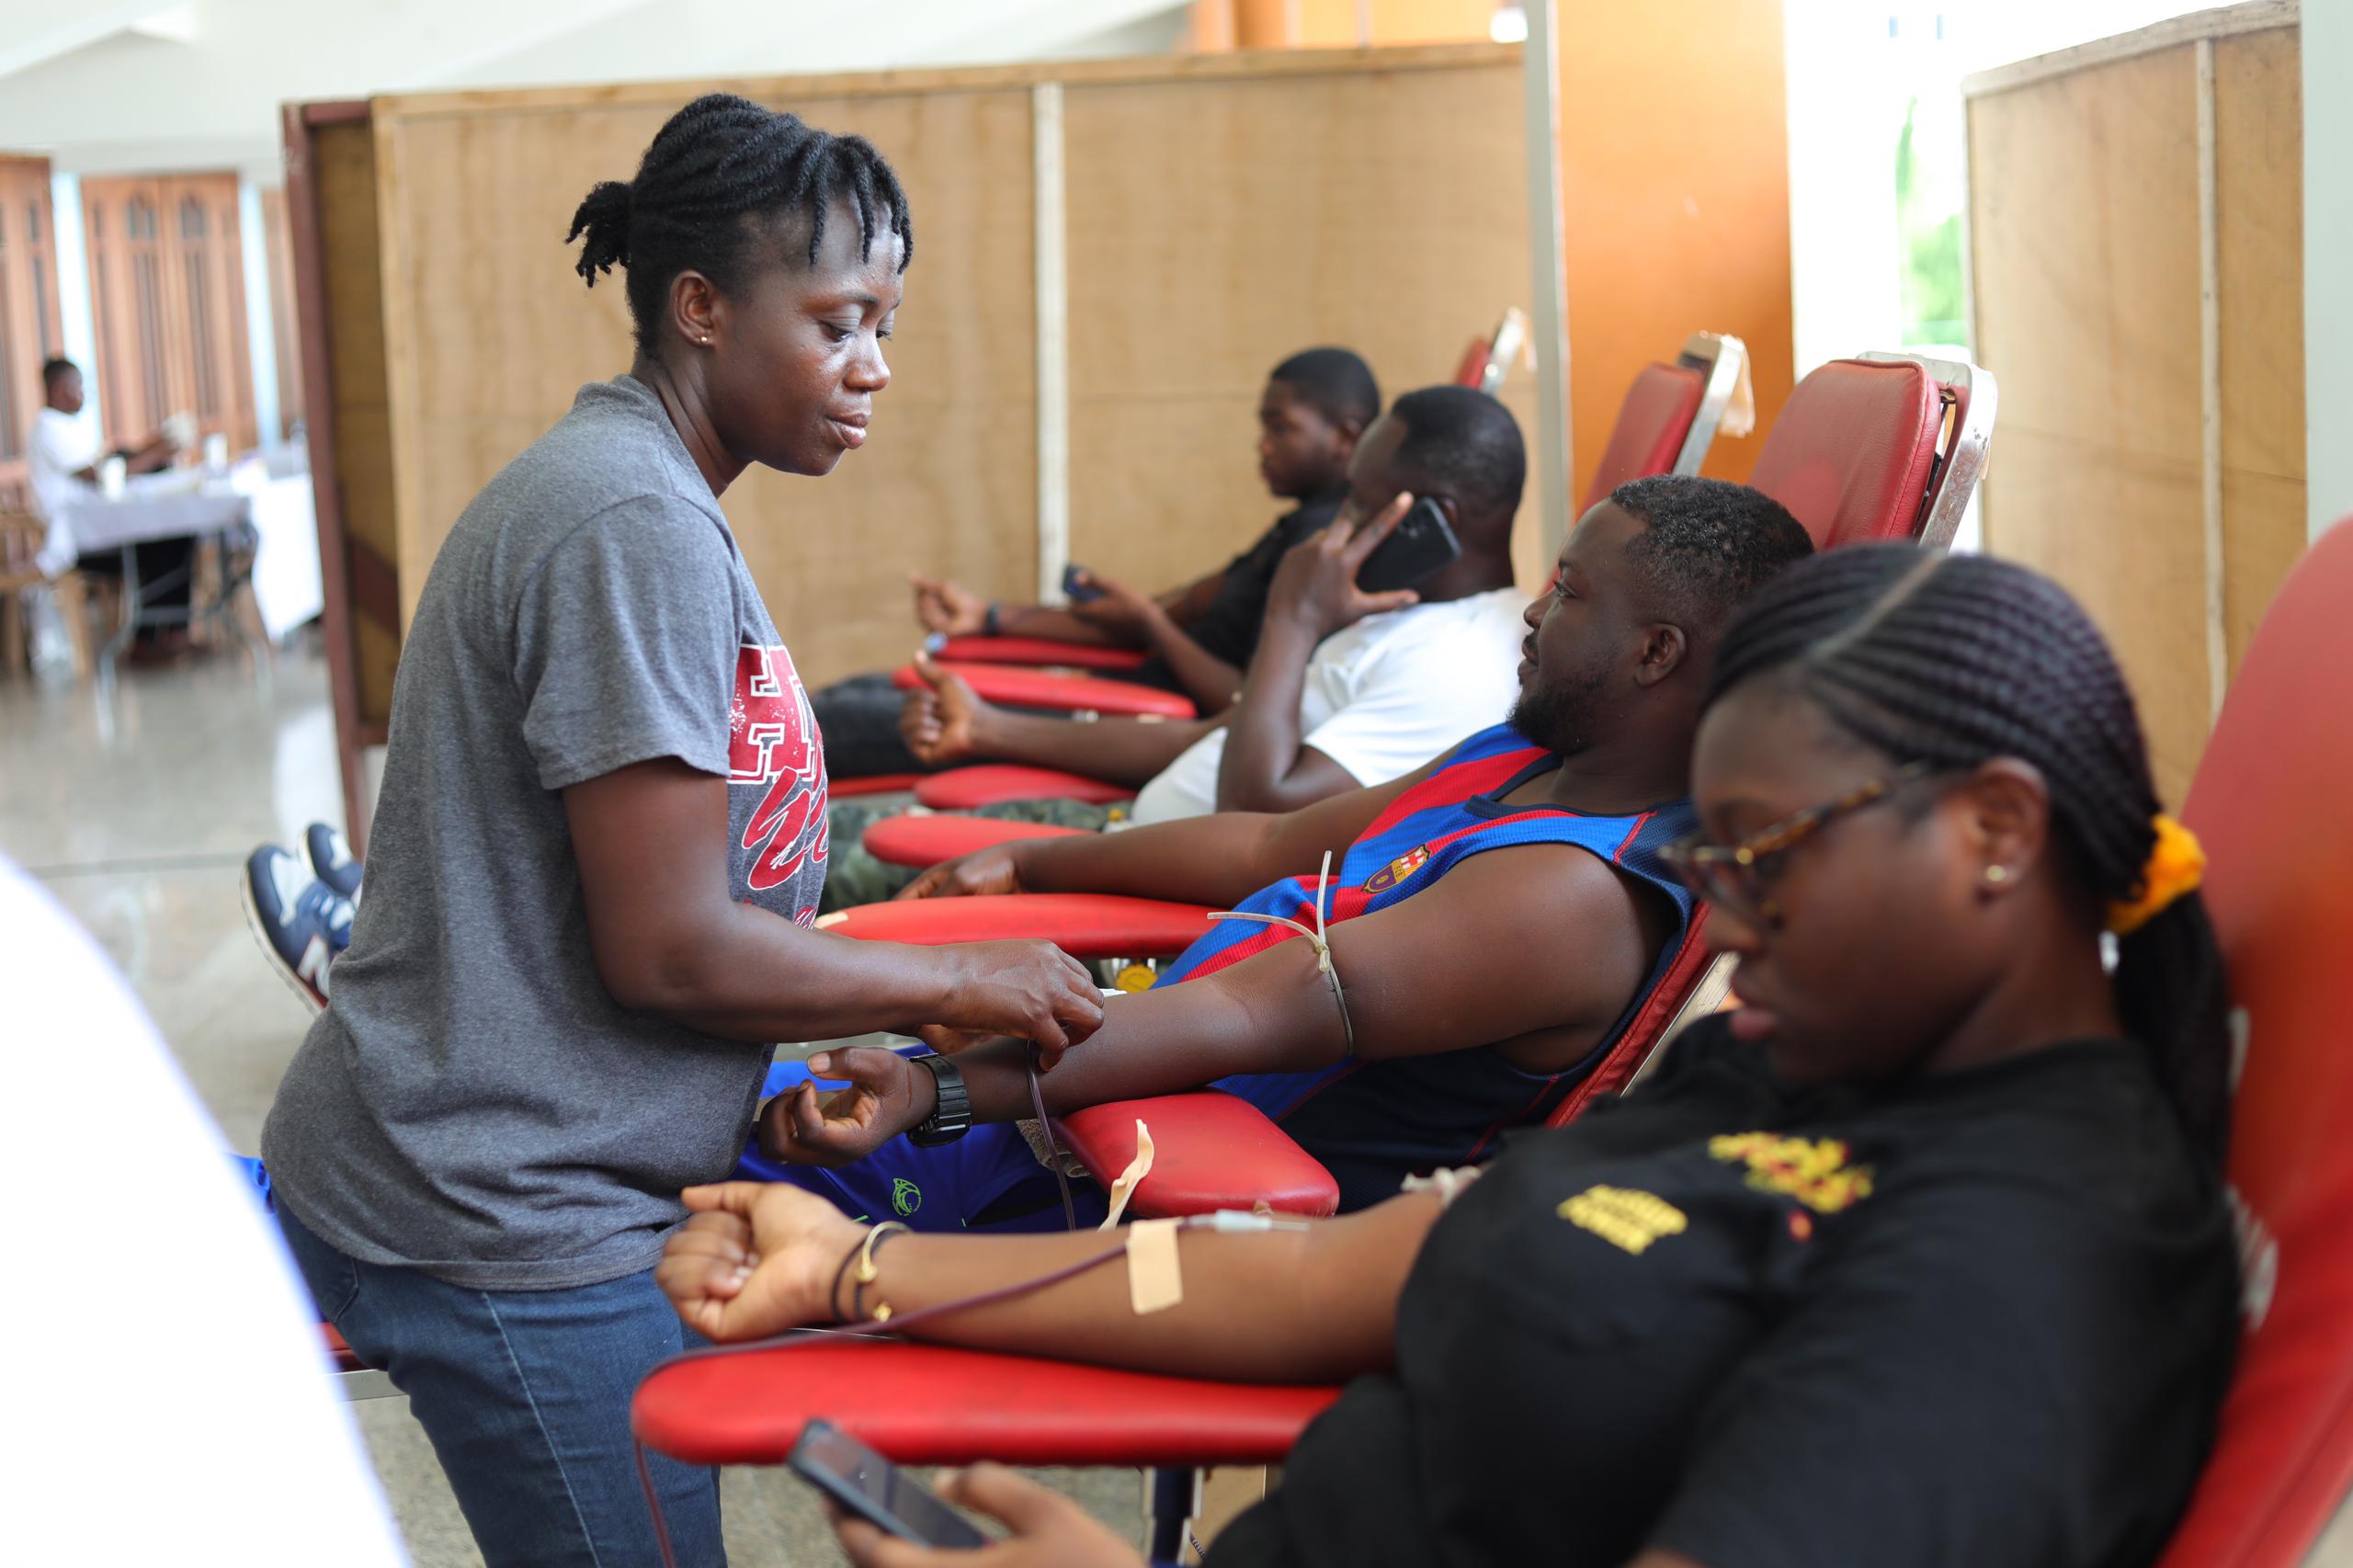 Some CCC members donating blood to the Medicine Transfusion Unit of KATH